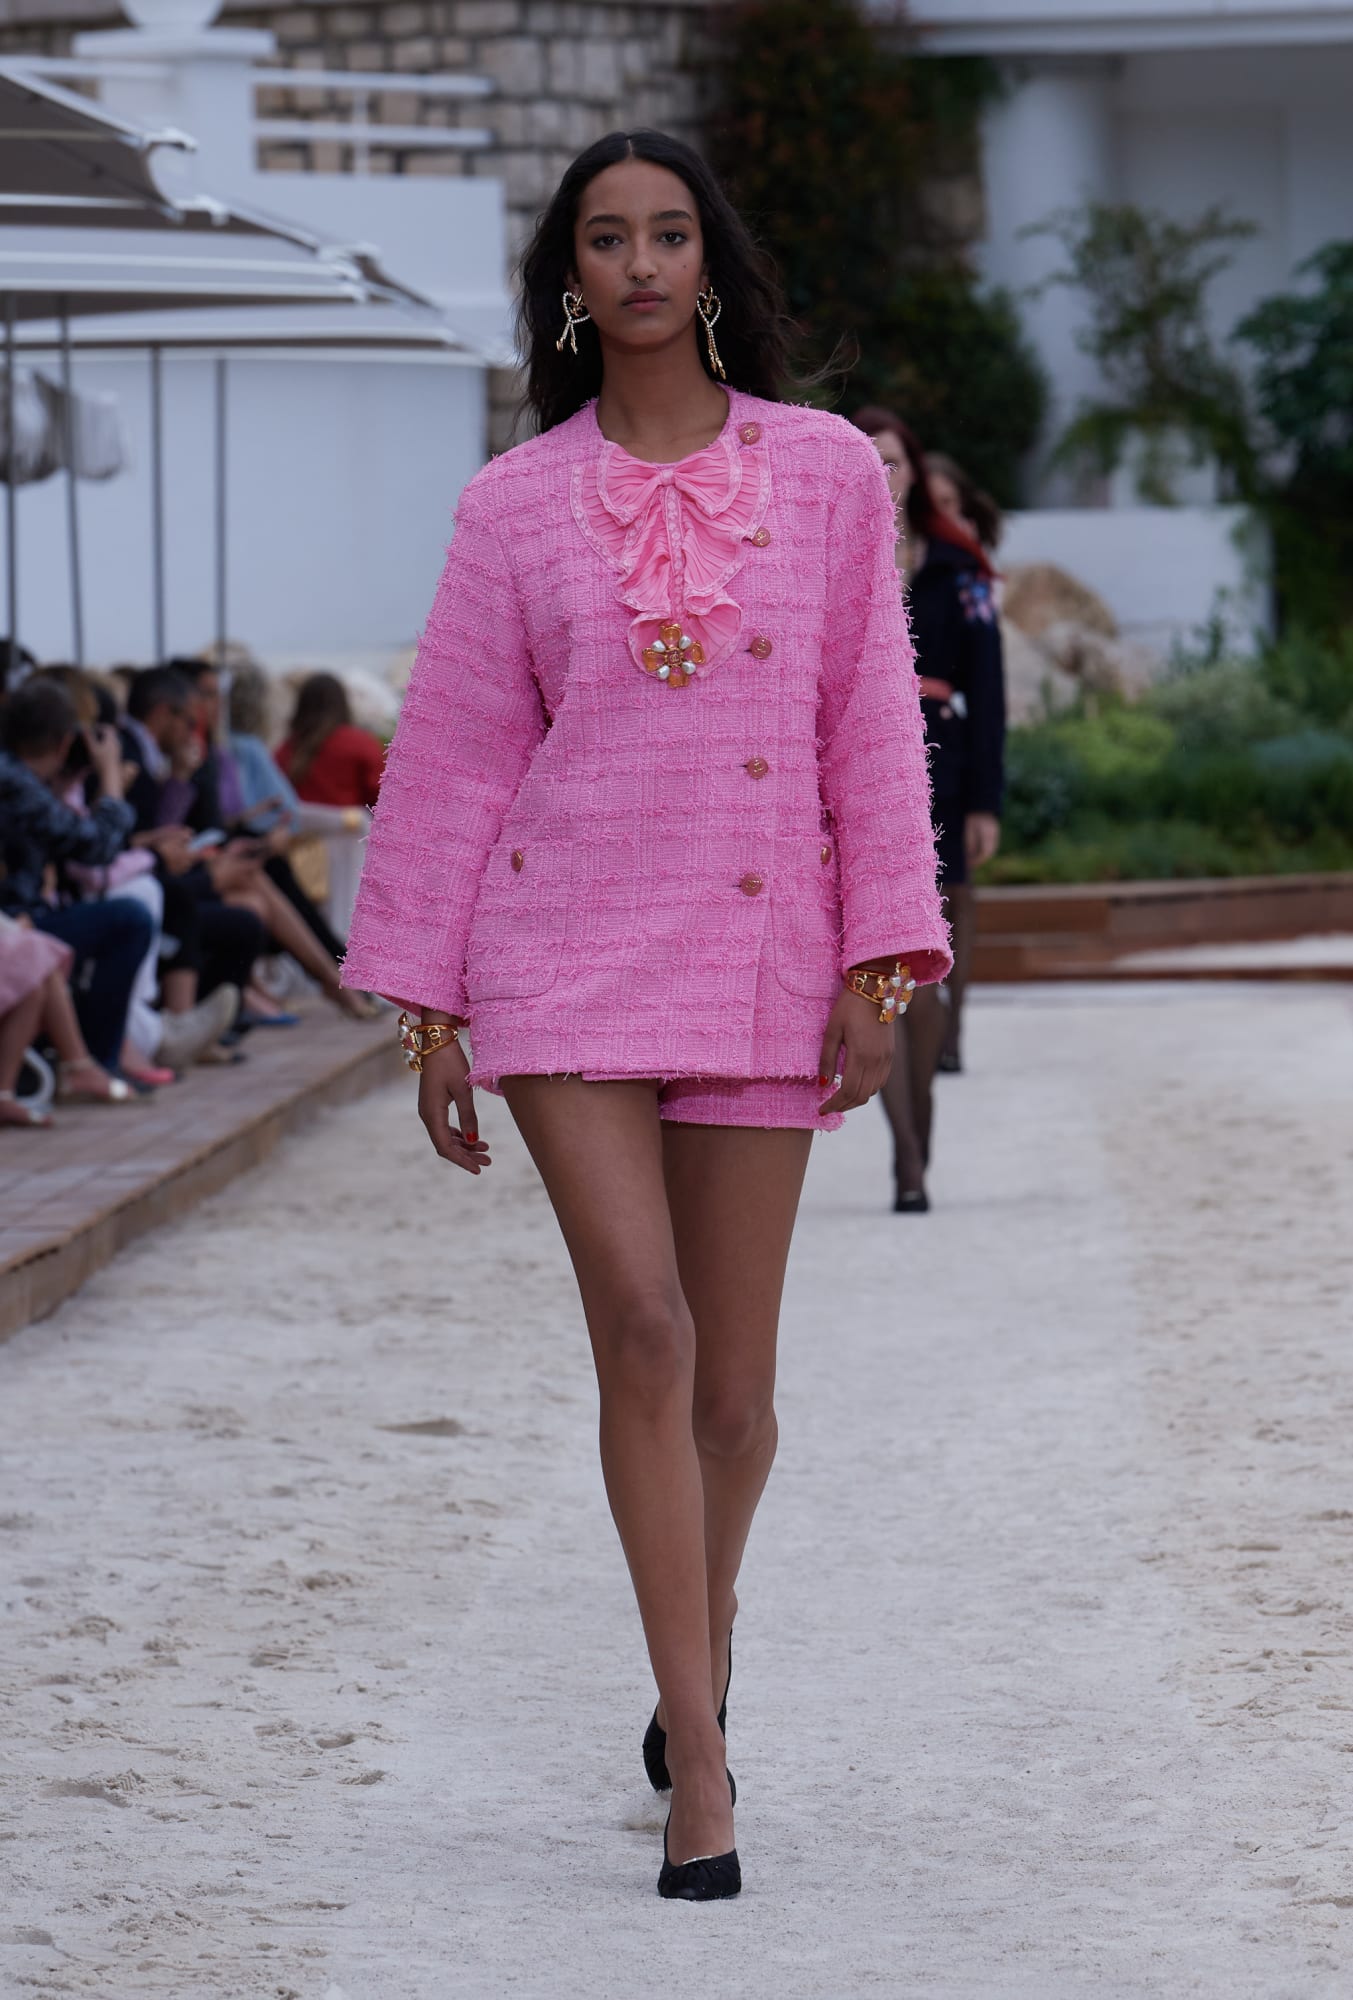 Chanel Cruise 2022/23 Collection